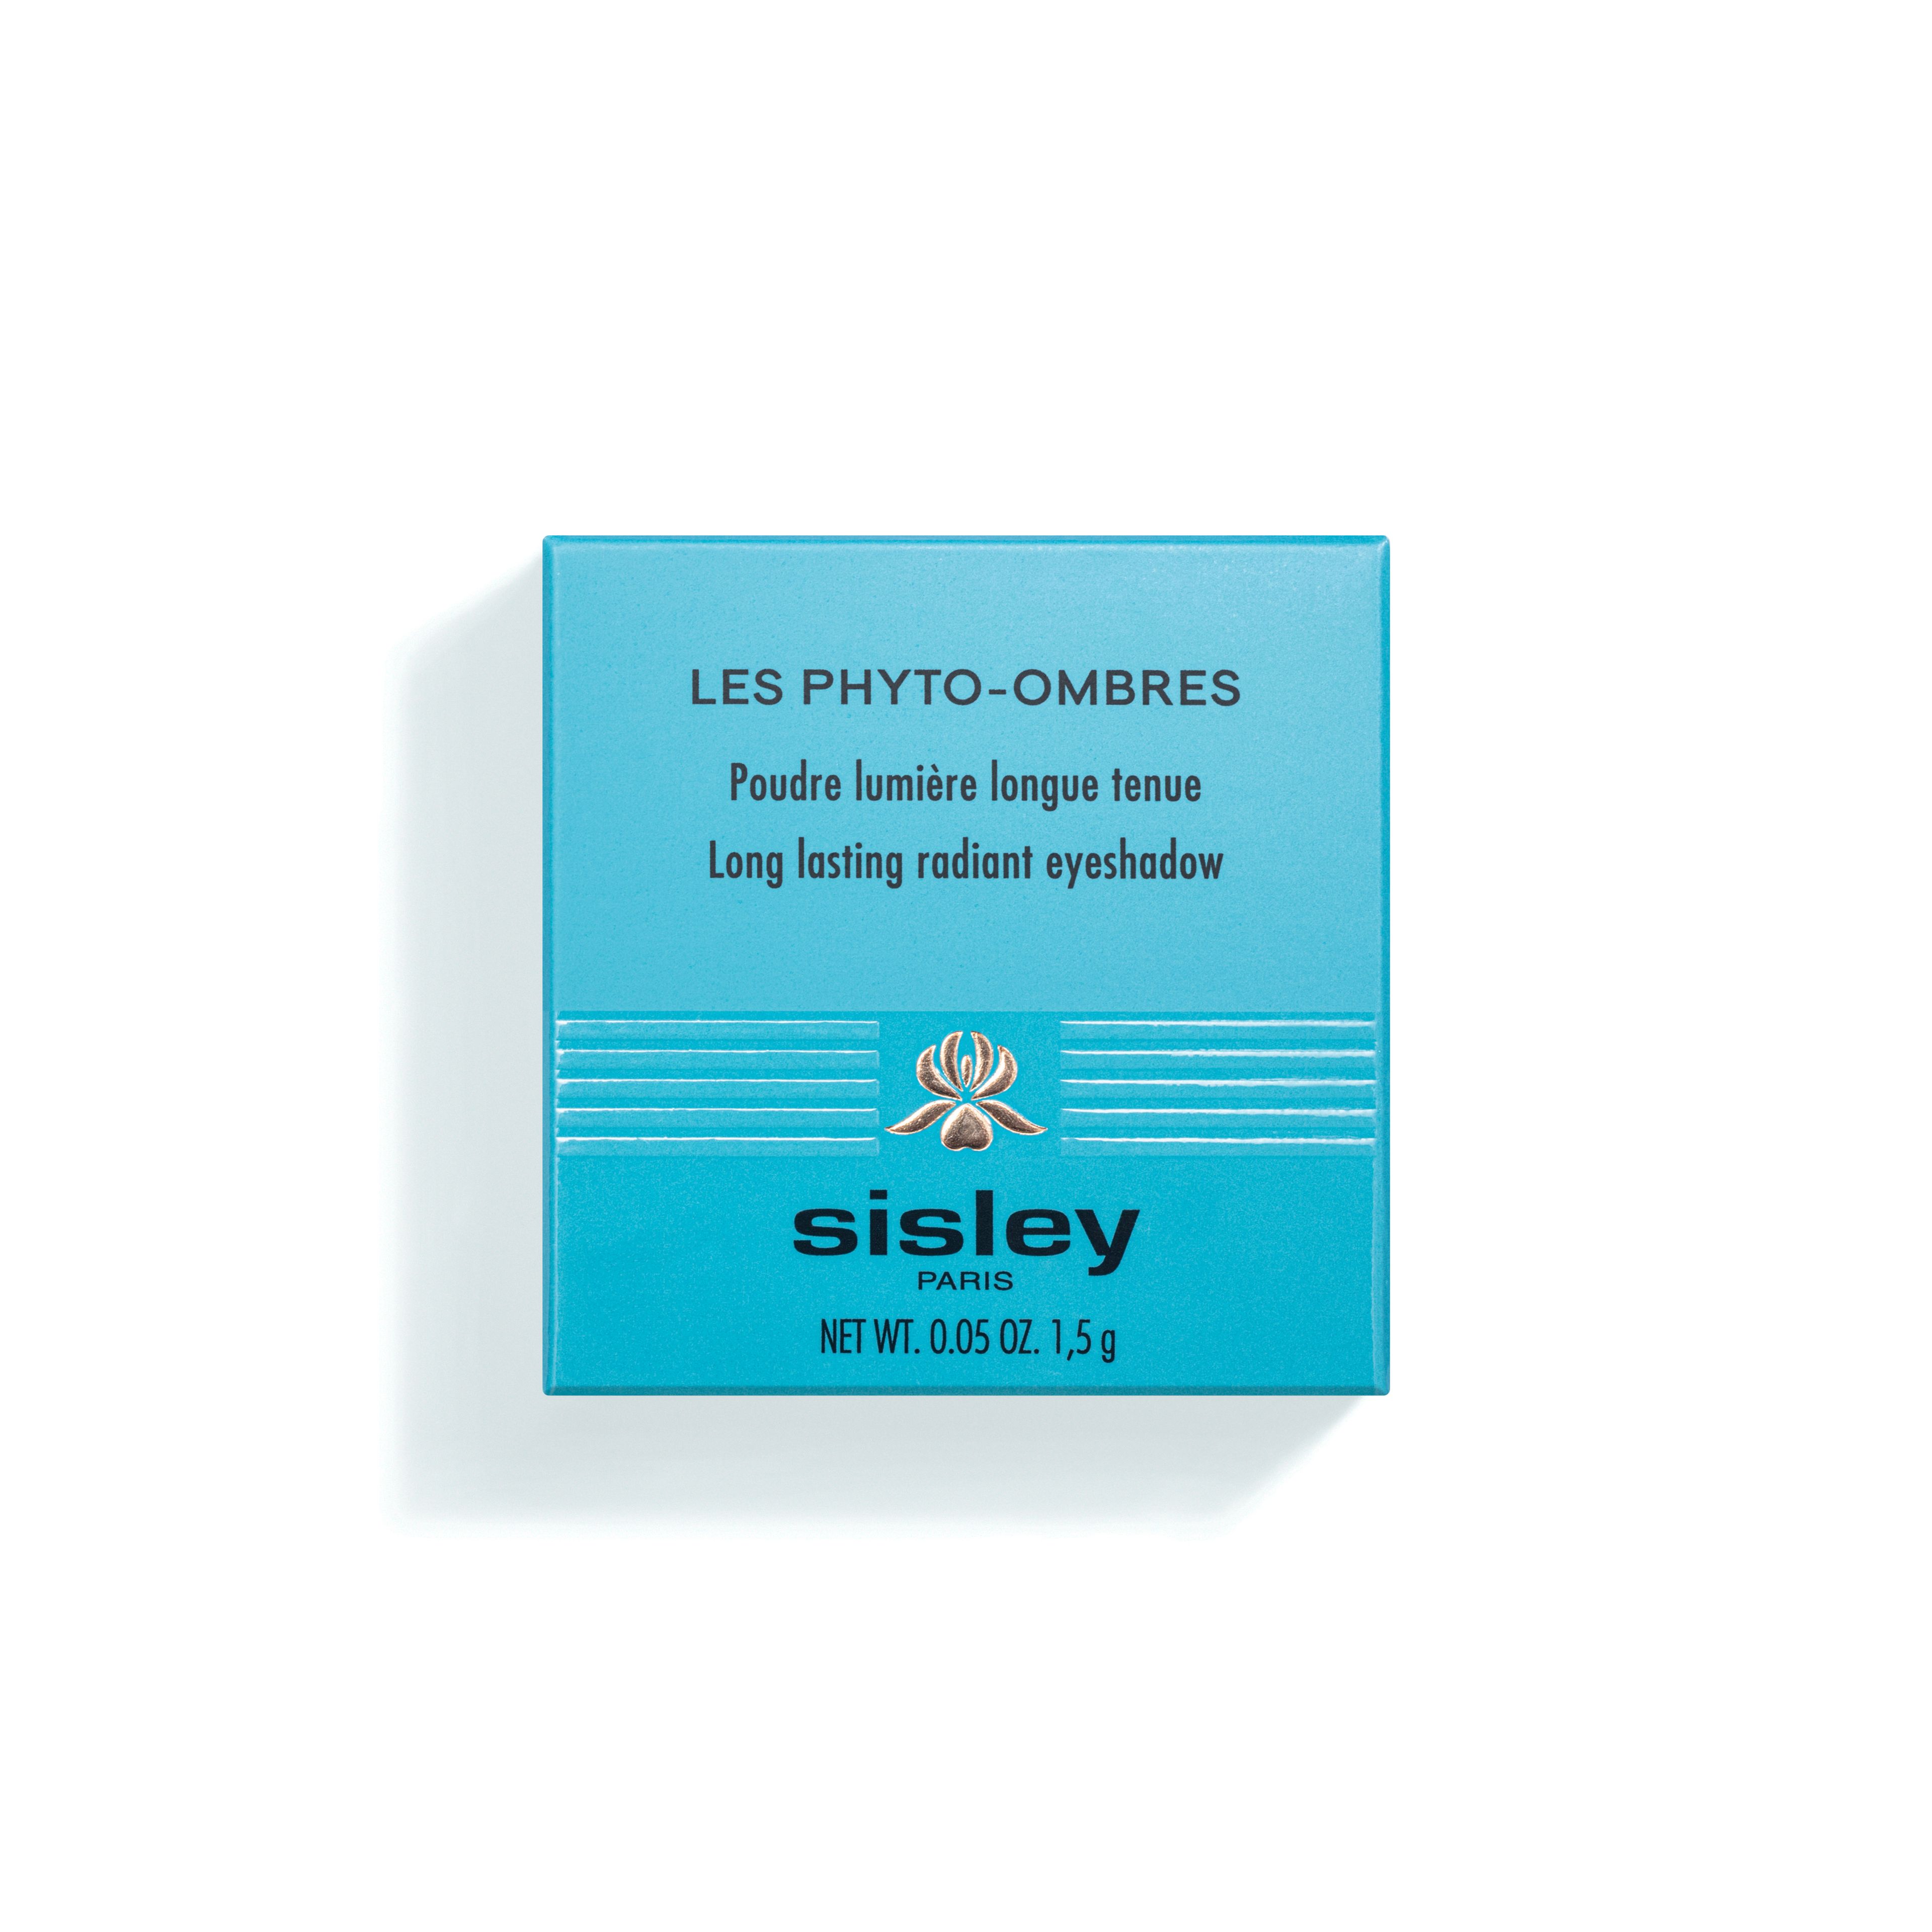 Les Phyto-ombres Sisley 4